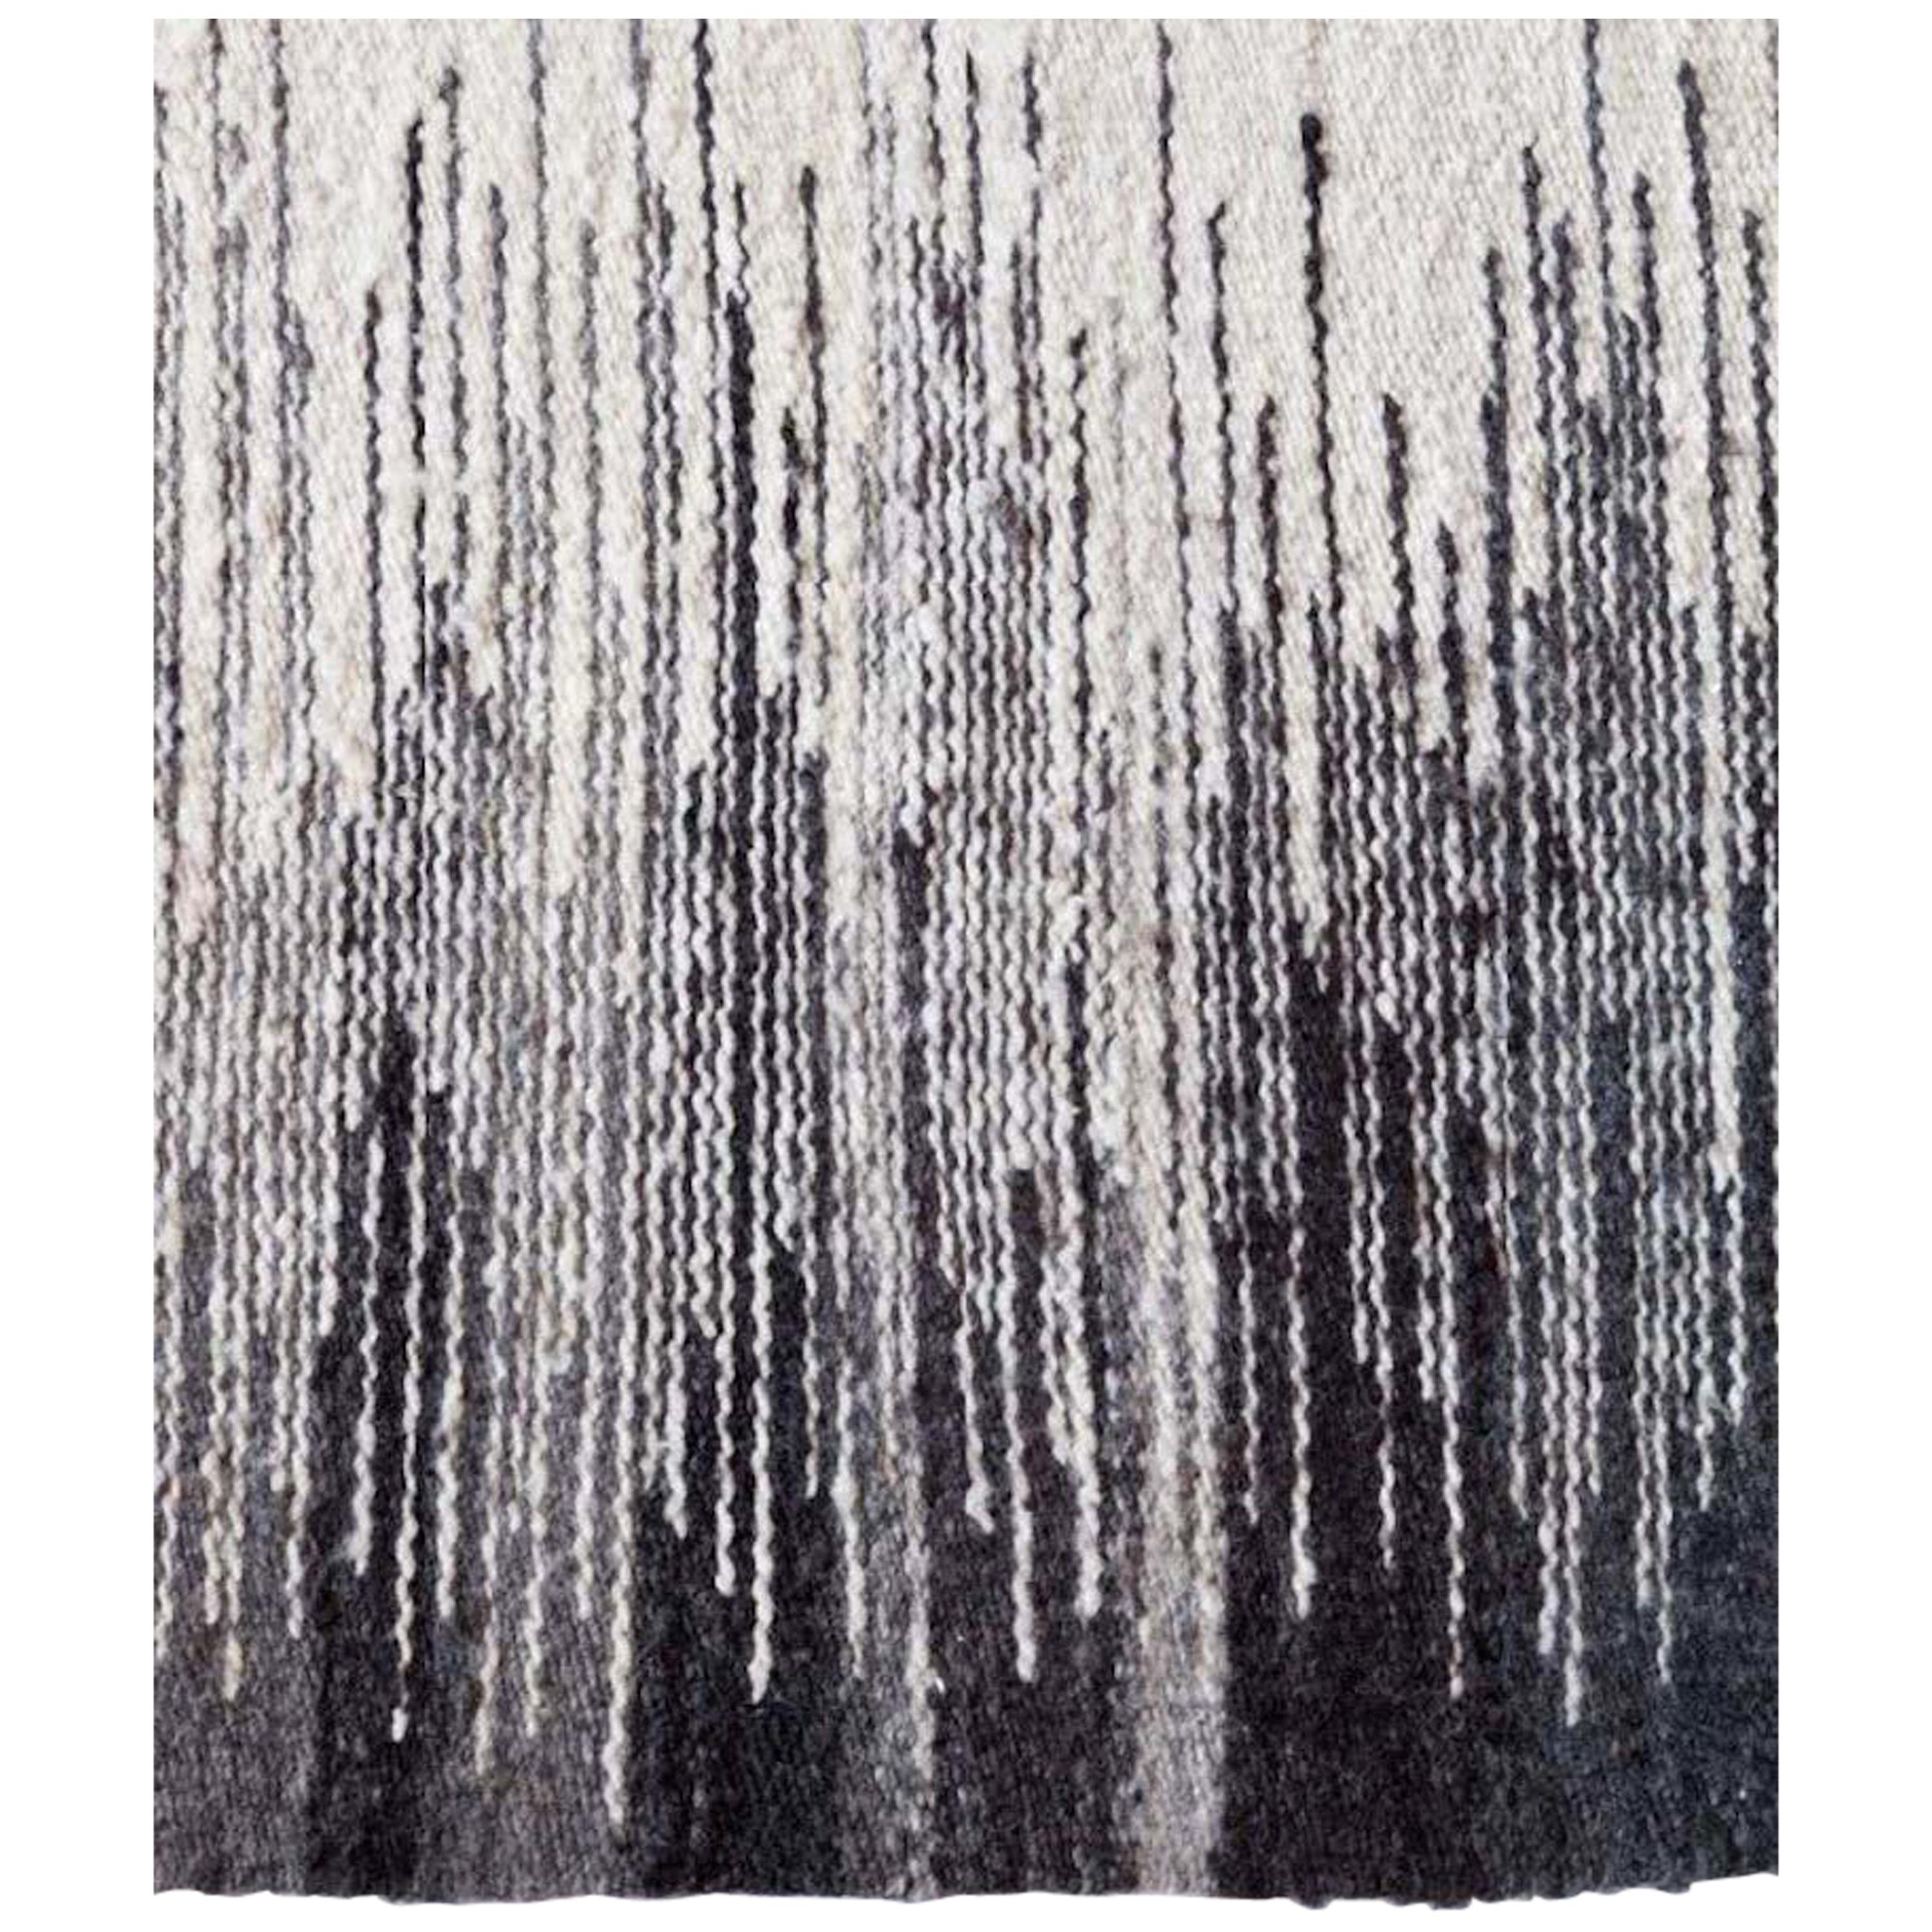 Handwoven Wool Flat-Weave Rug in Black and White Pattern